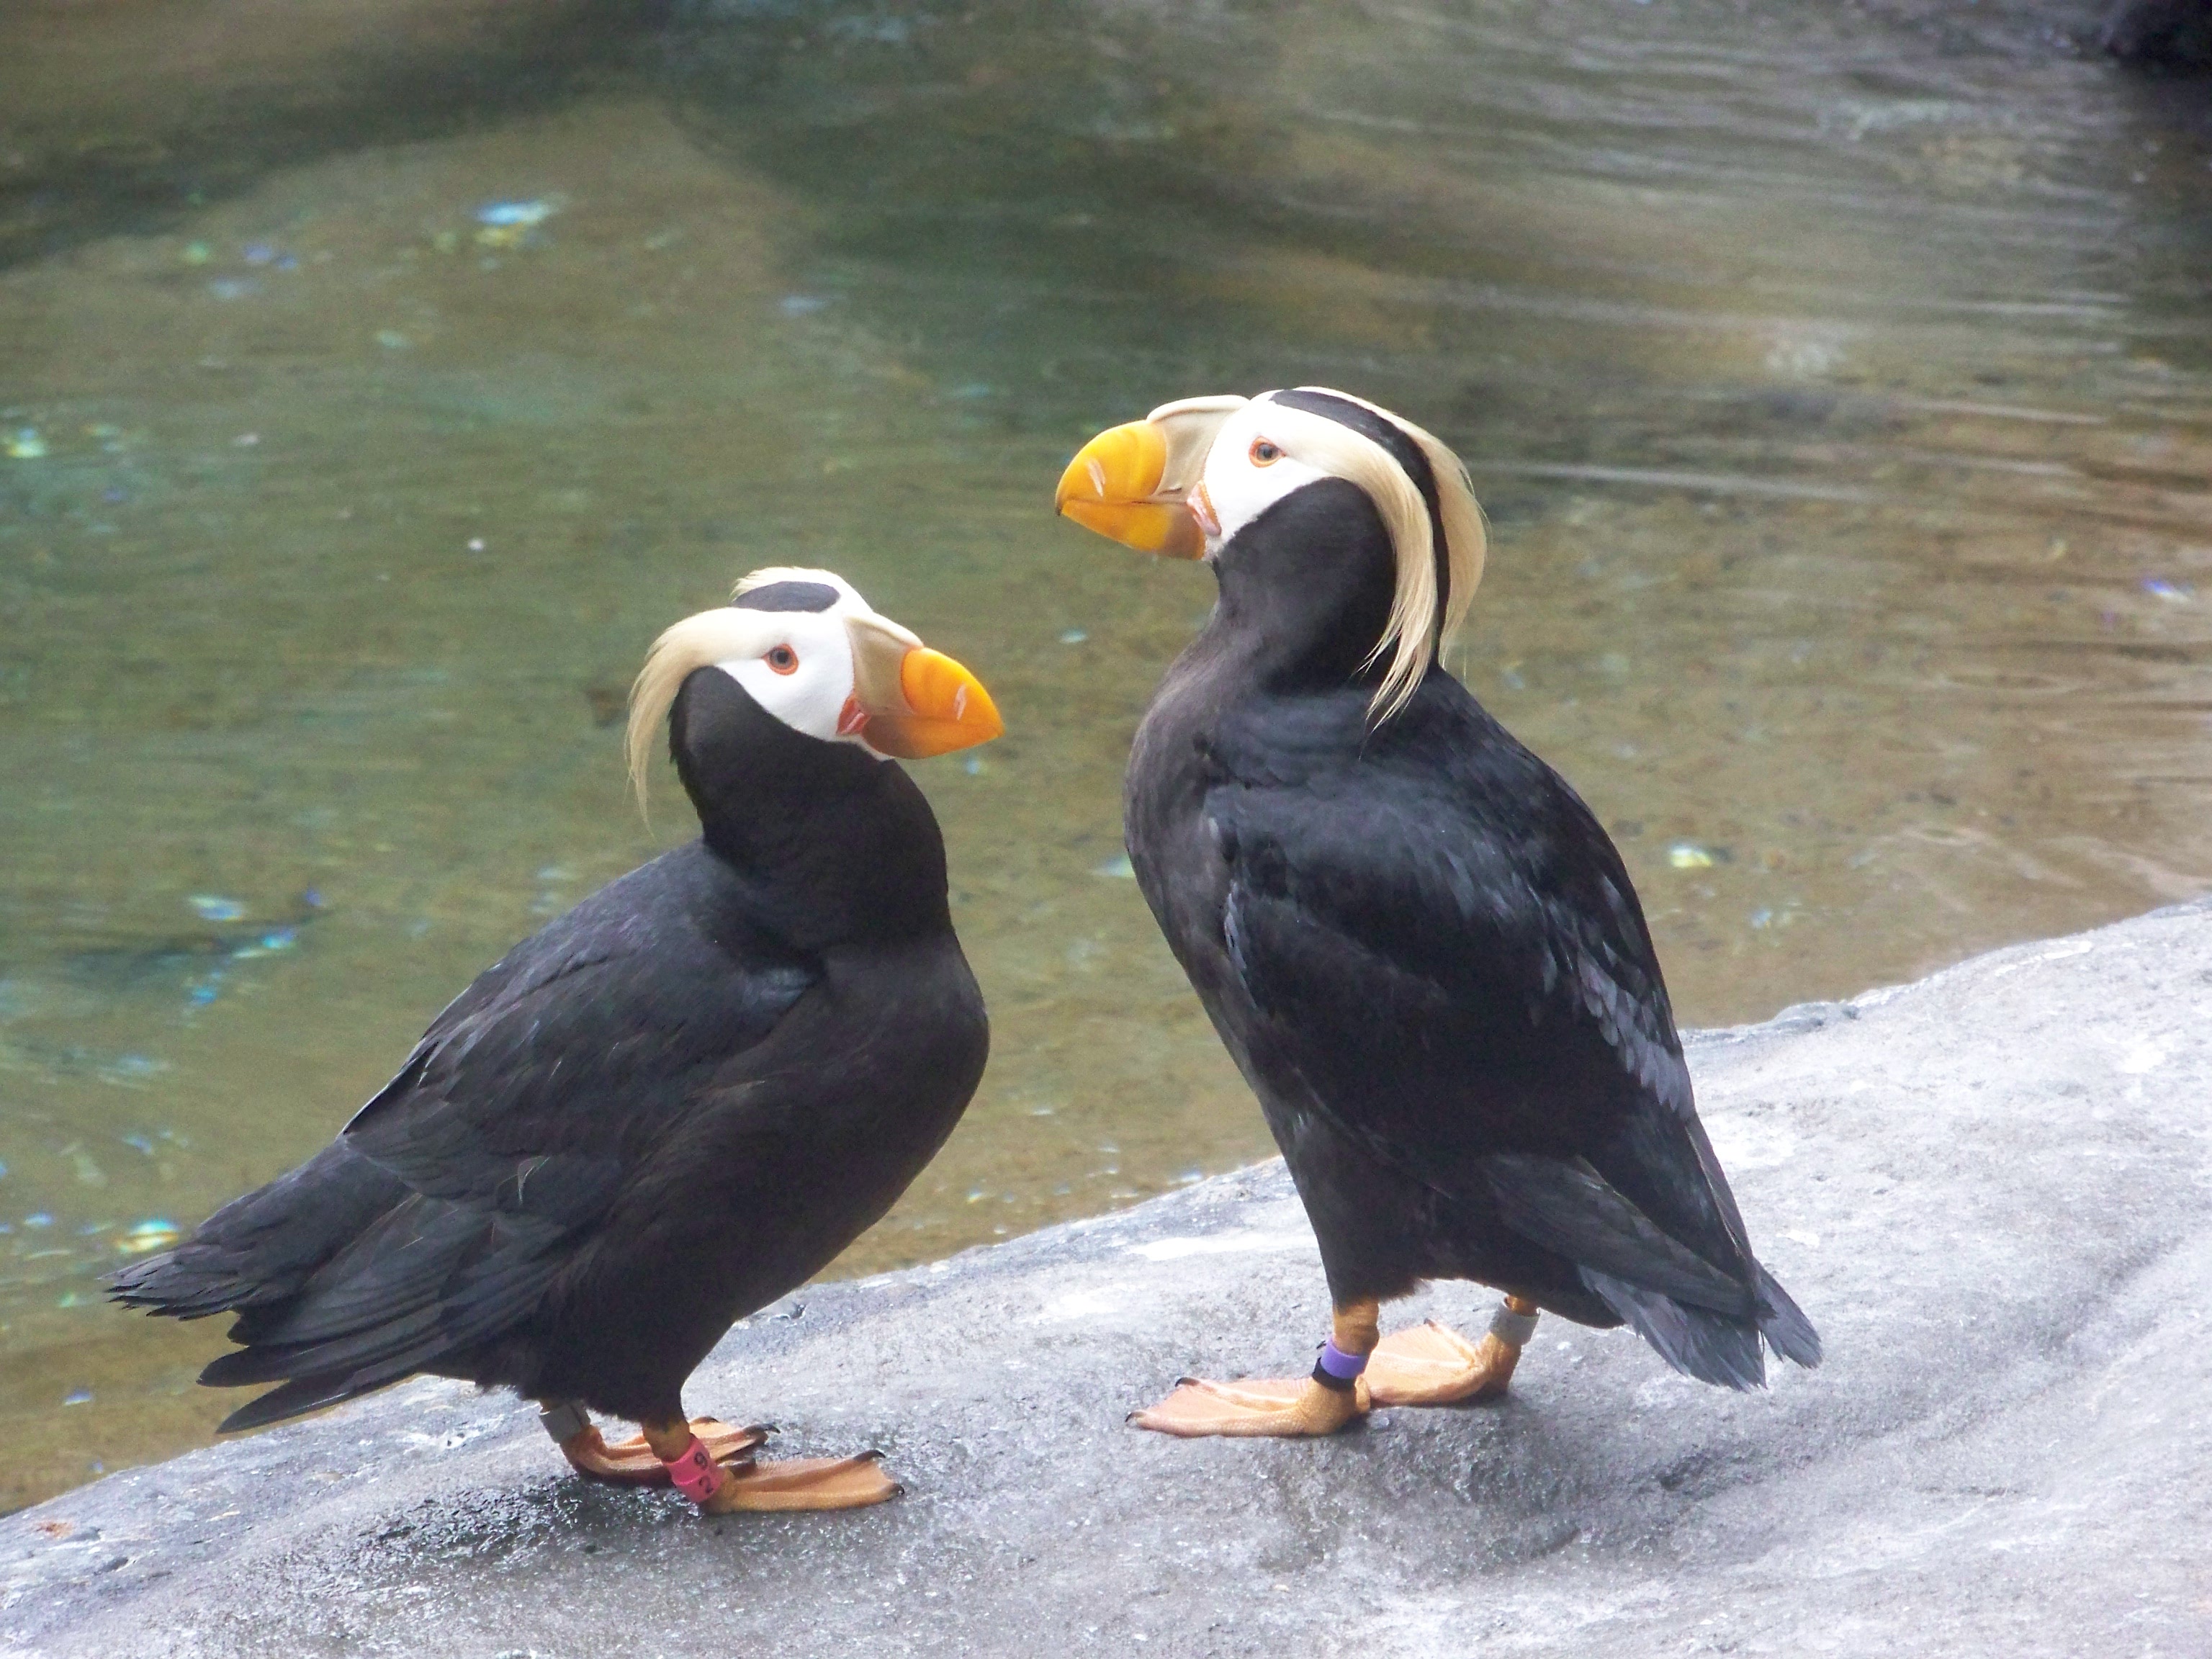 Point Defiance Zoo and Aquarium (and tufted puffins!) | Puffinpalooza